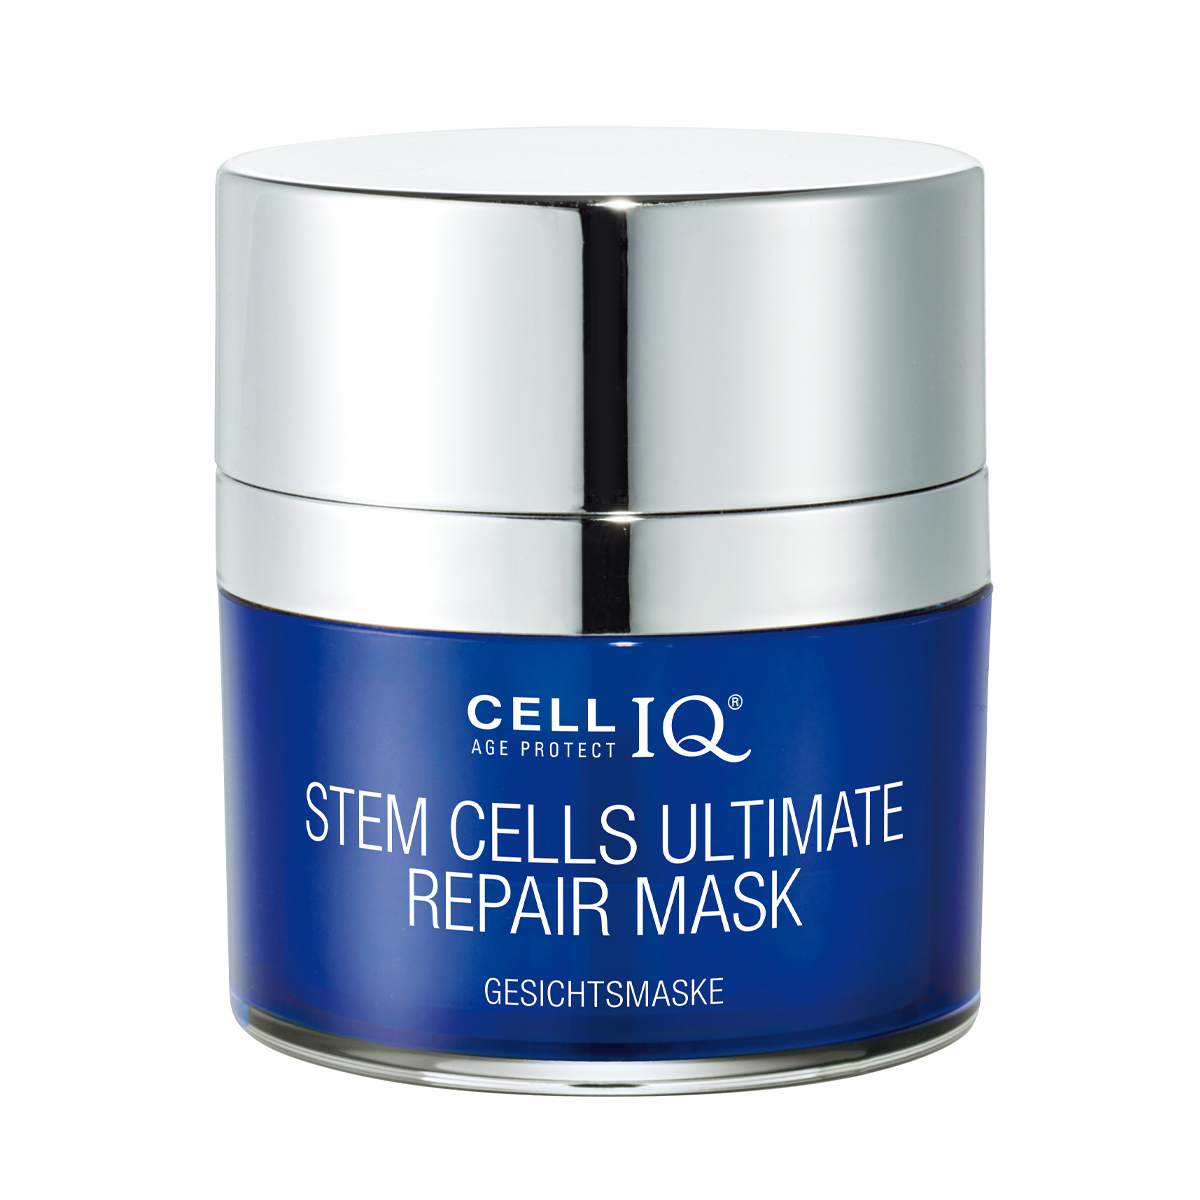 BINELLA  CELL IQ STEM CELLS ULTIMATE REPAIR MASK / ΜΑΣΚΑ ΕΠΑΝΟΡΘΩΣΗΣ 50ml